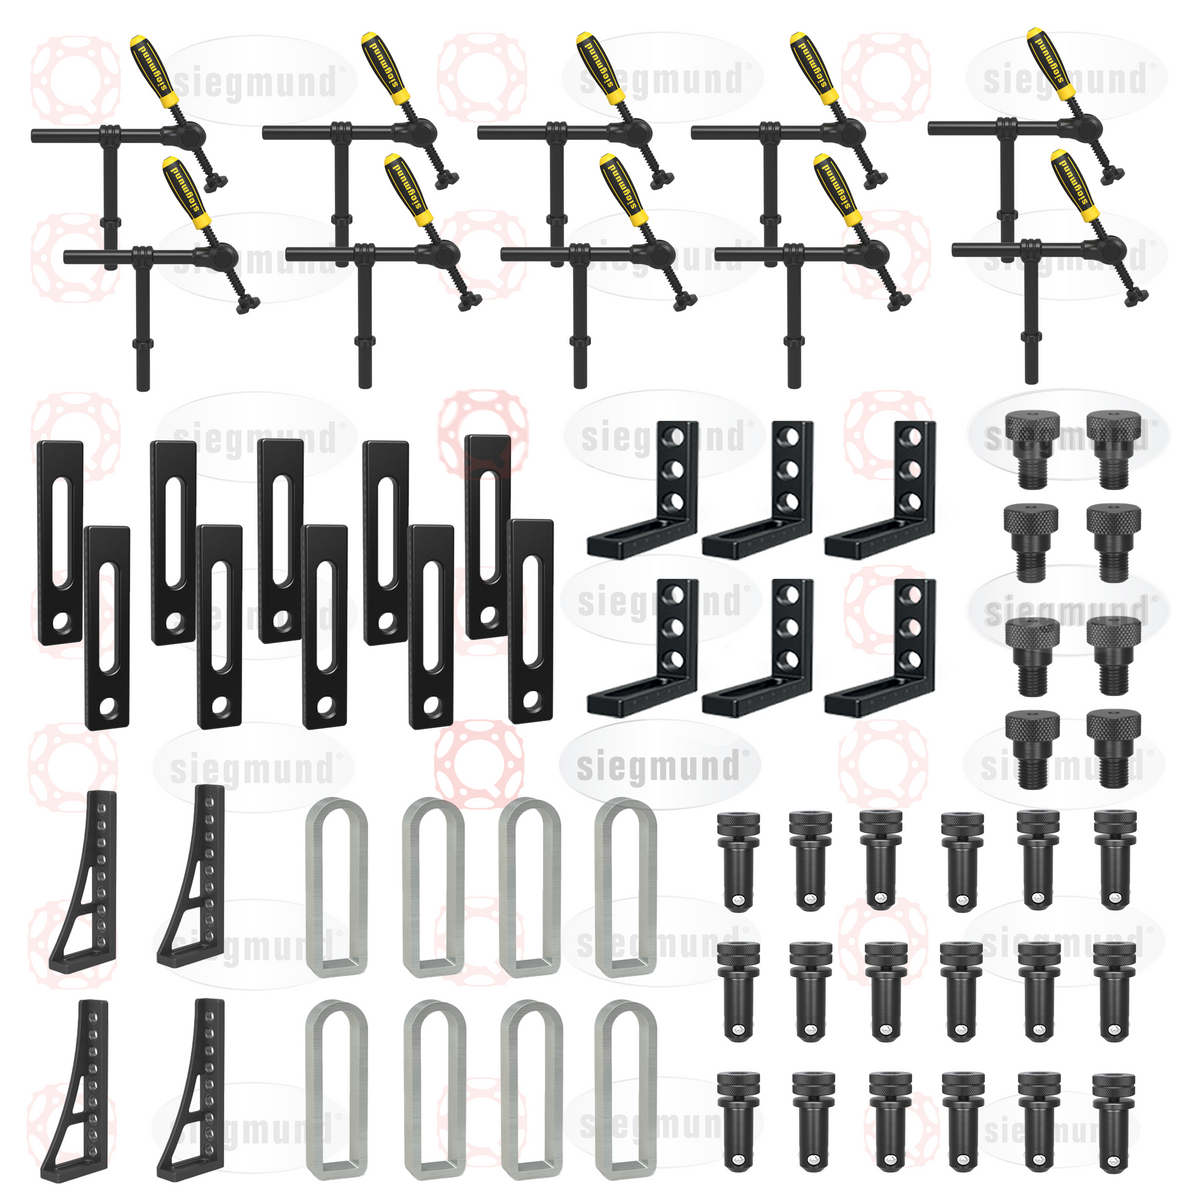 US281400: System 28 BASIC Imperial Series Set 3, 70 Piece Accessory Kit